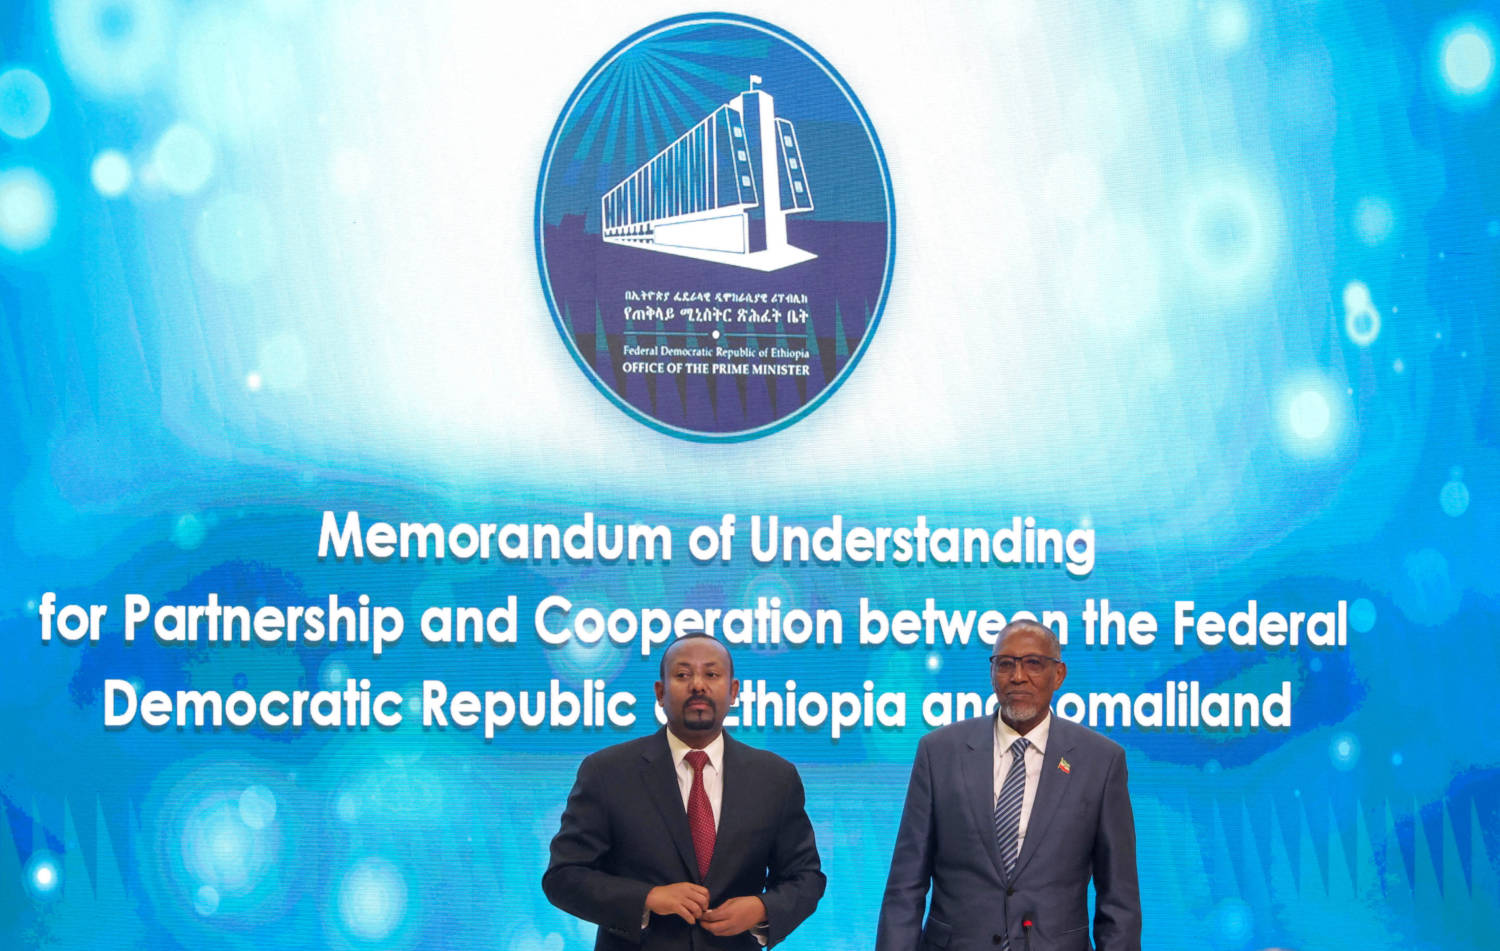 Signing Of The Memorandum Of Understanding Agreement Between Ethiopia And Somaliland, In Addis Ababa